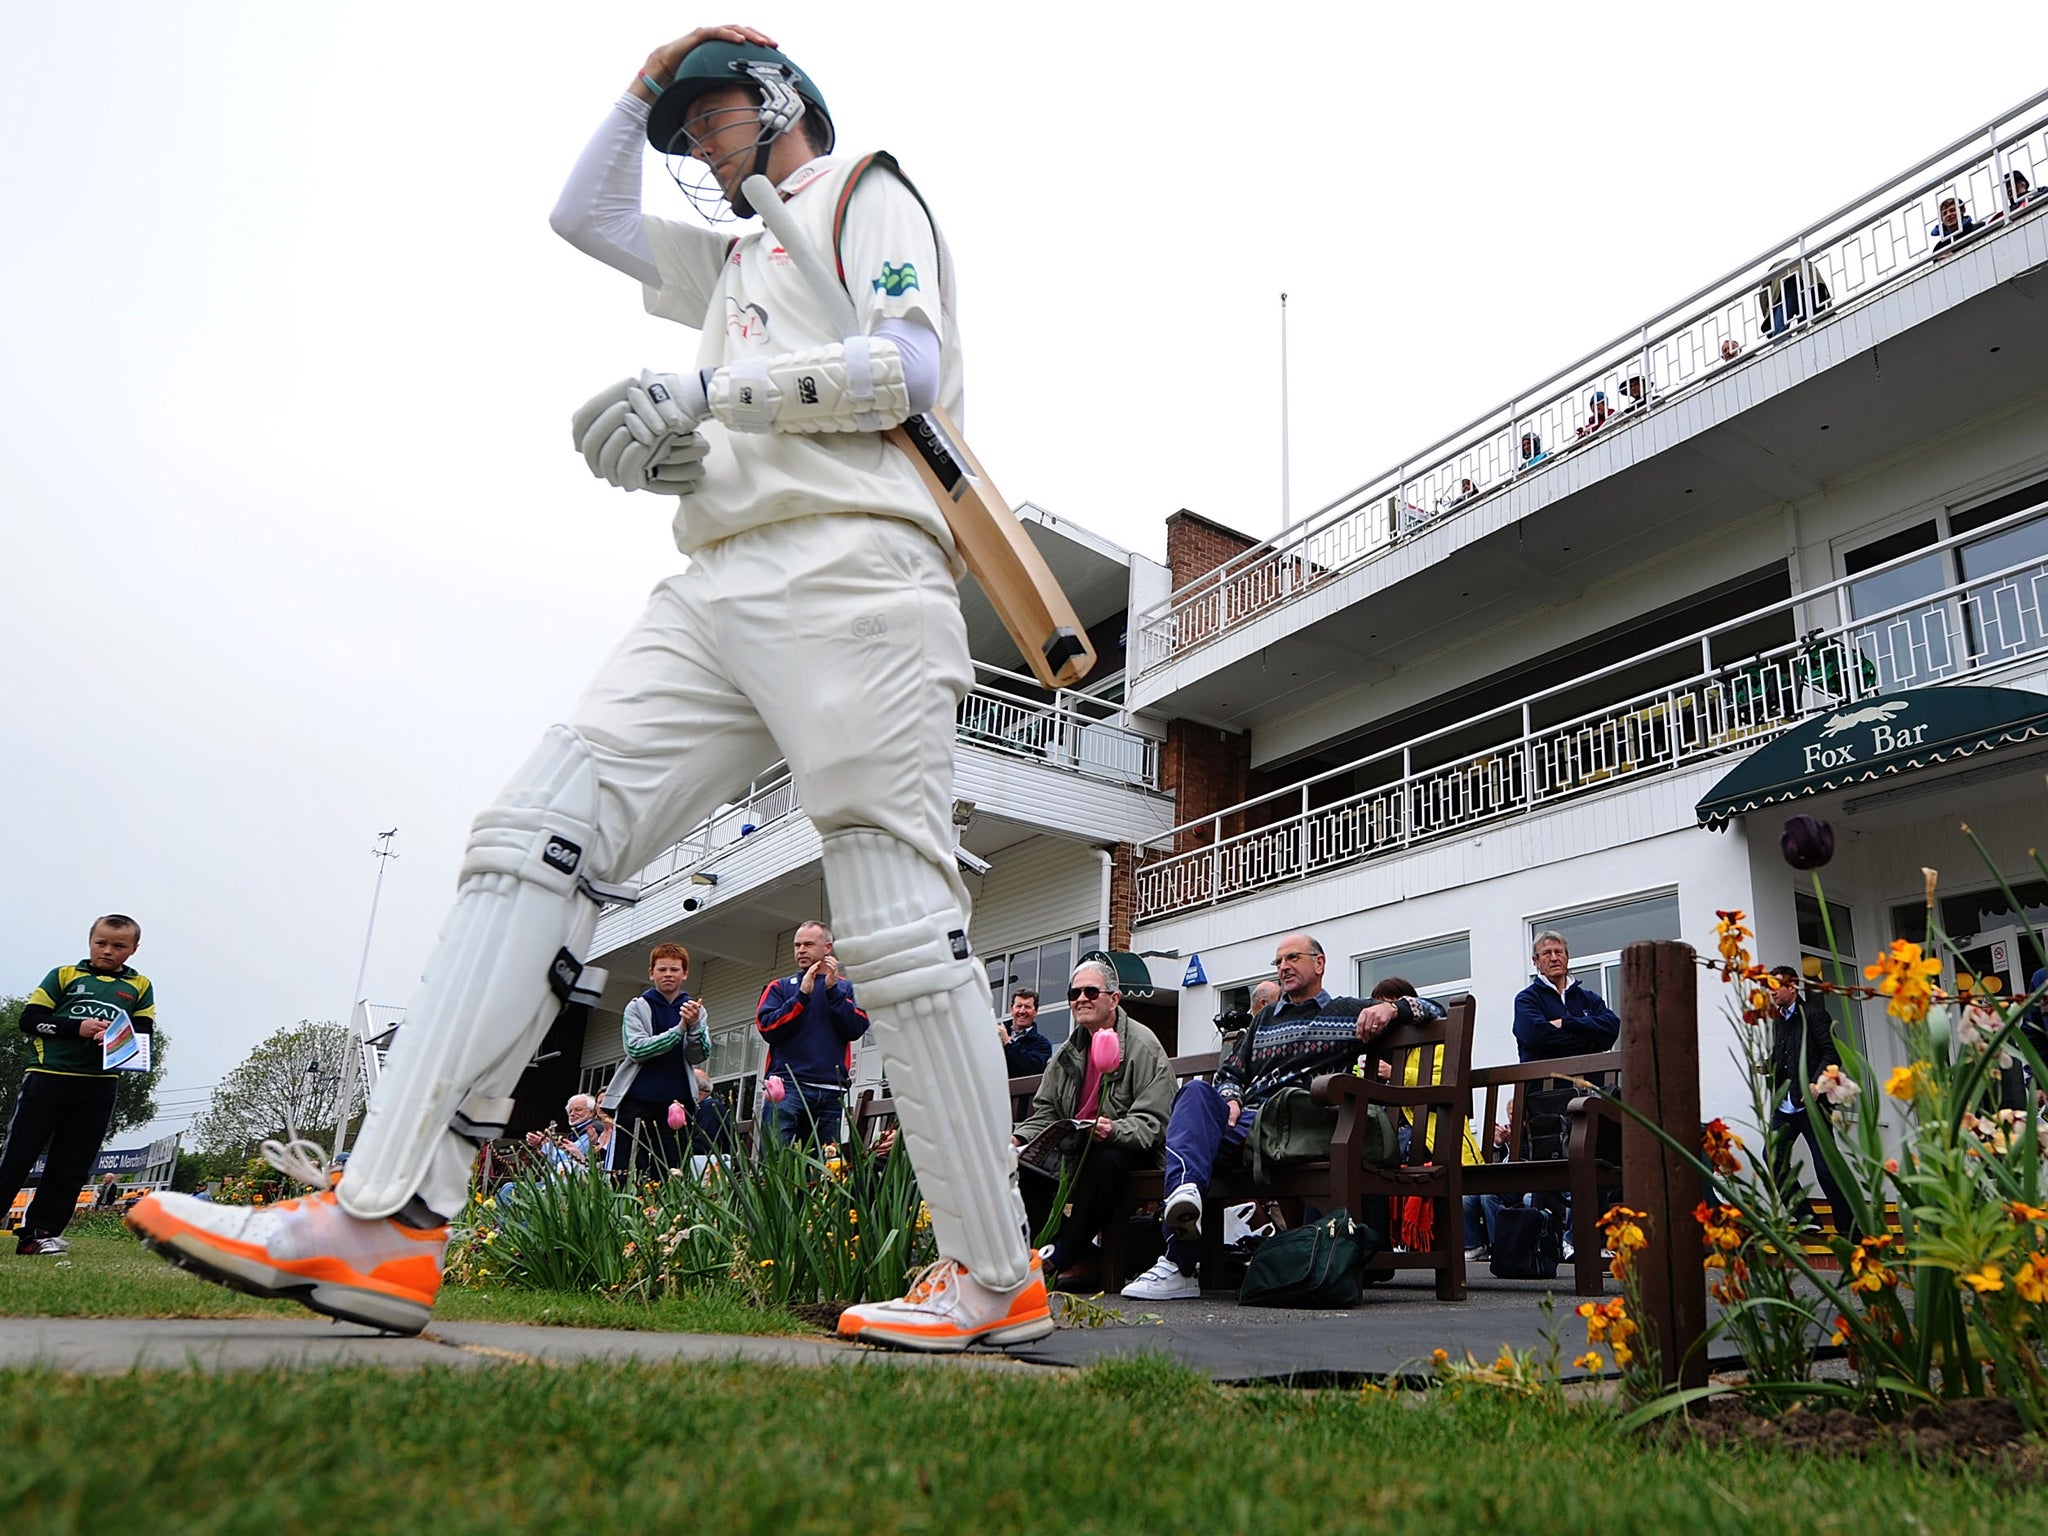 Only half the current crop of county cricketers come from a state school background